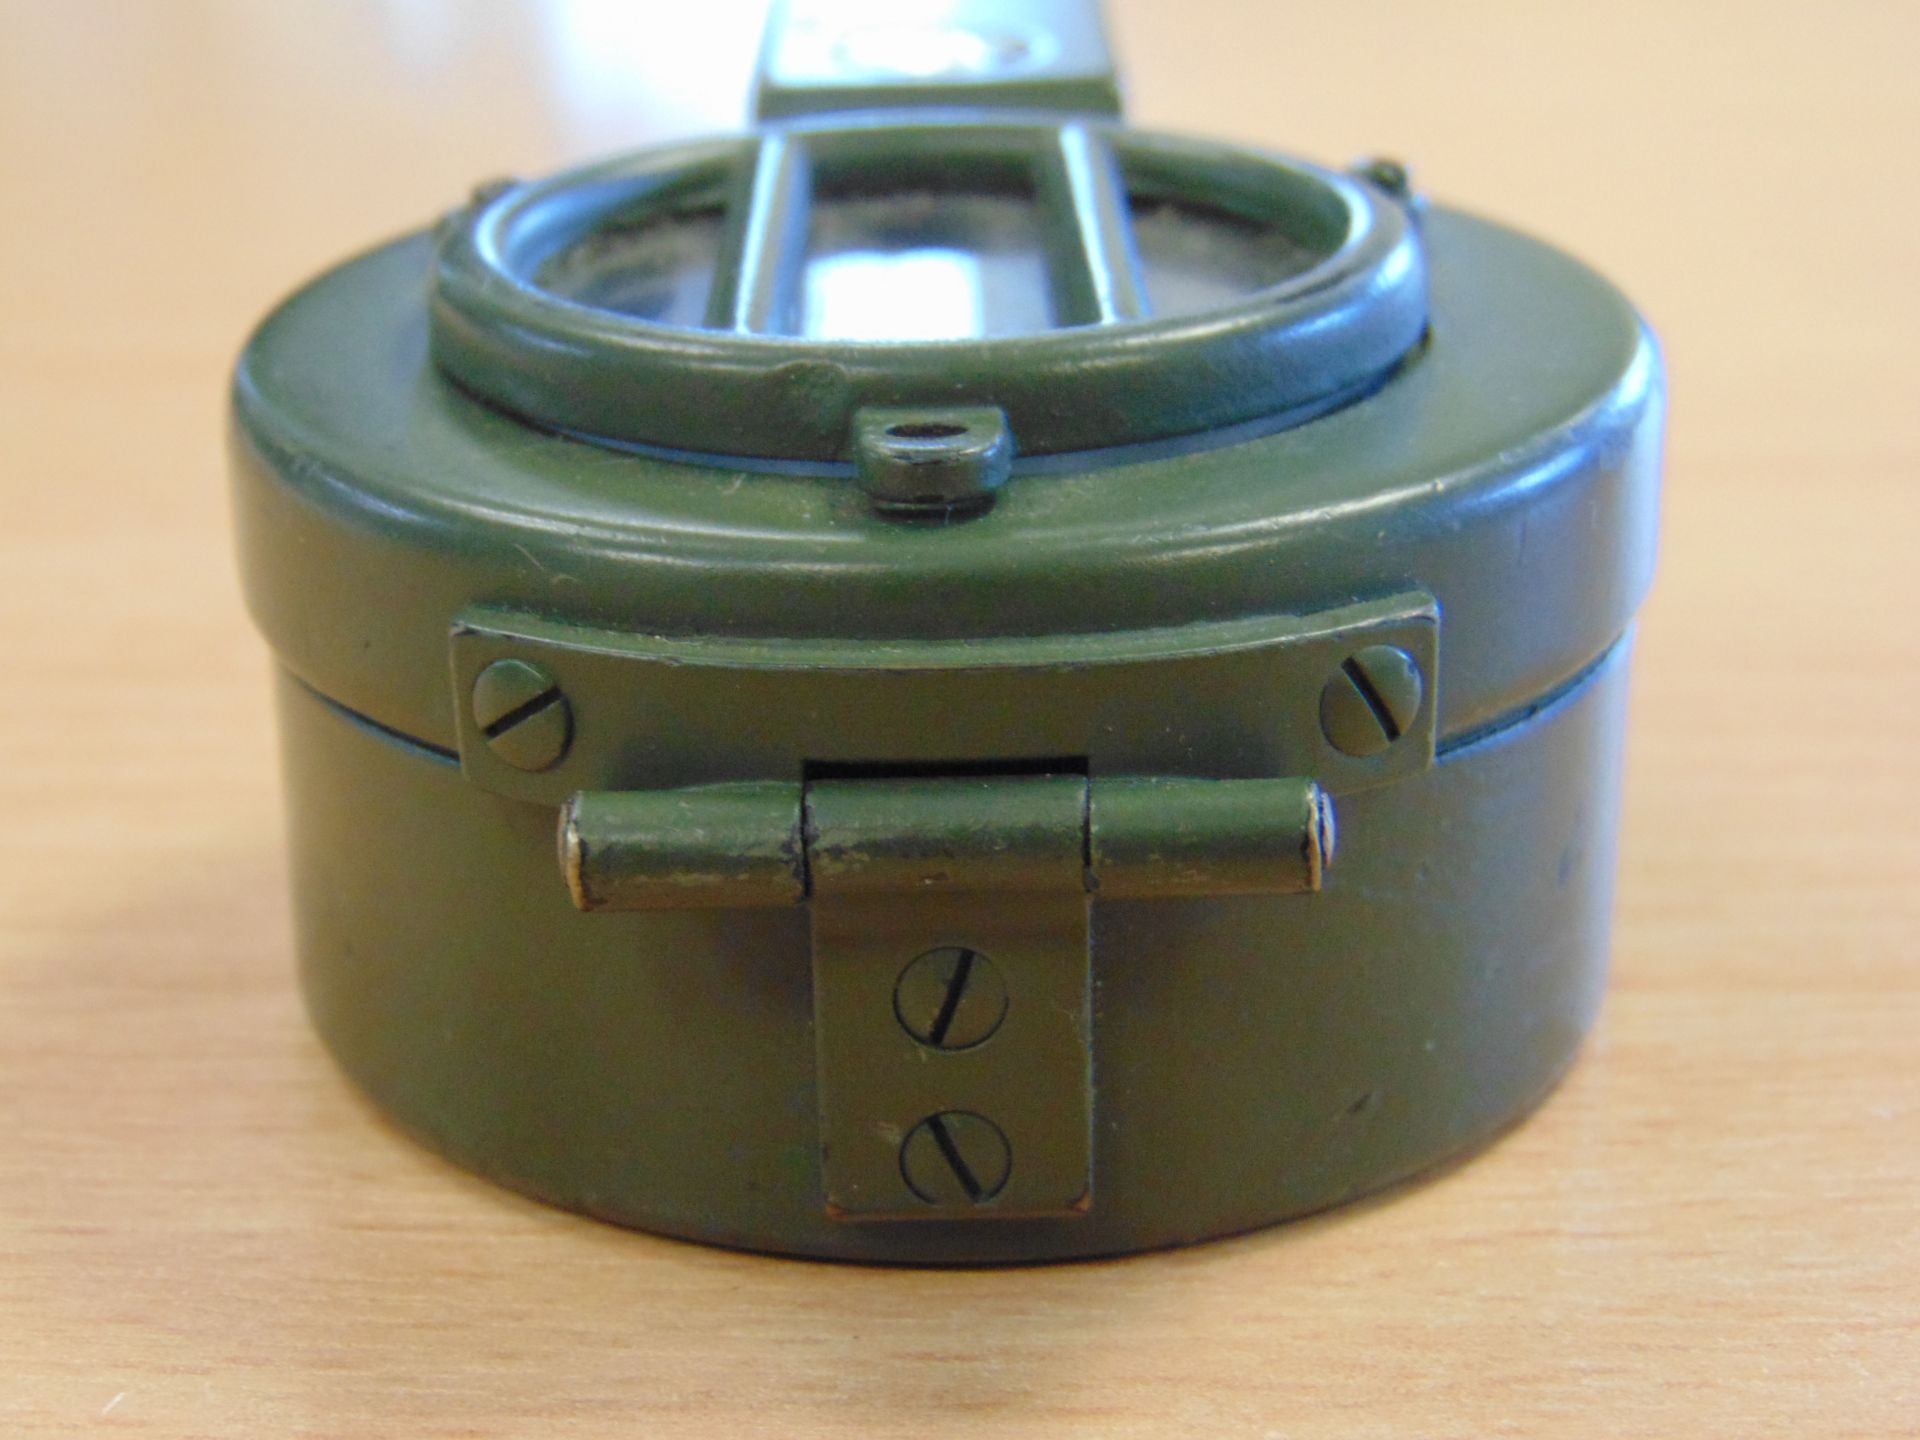 Francis Barker British Army Prismatic Compass in Mils - Image 10 of 13